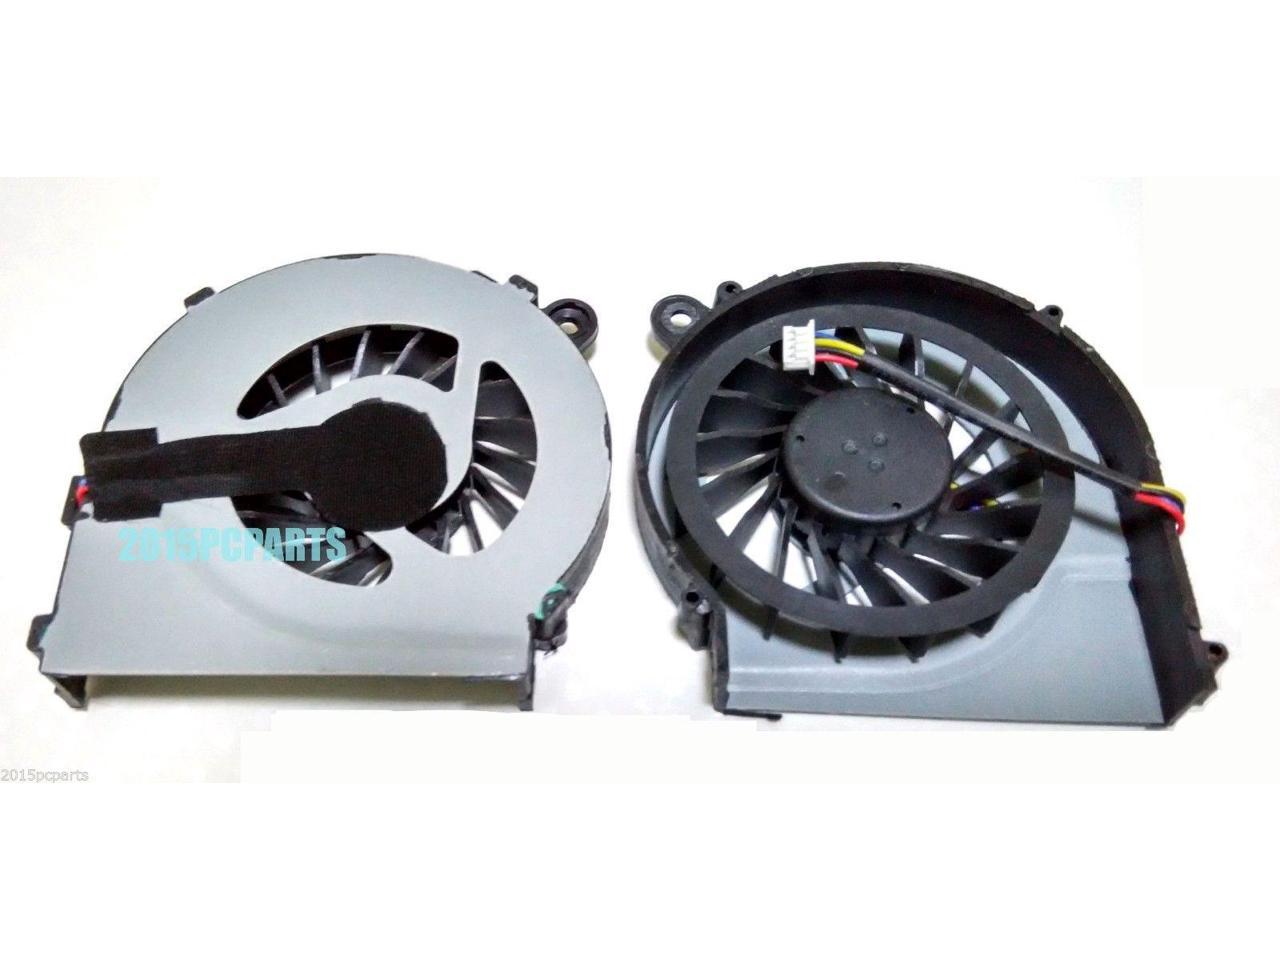 NEW FOR HP g6-1d34ca g6-1d38dx g6-1d40ca series CPU Fan with grease